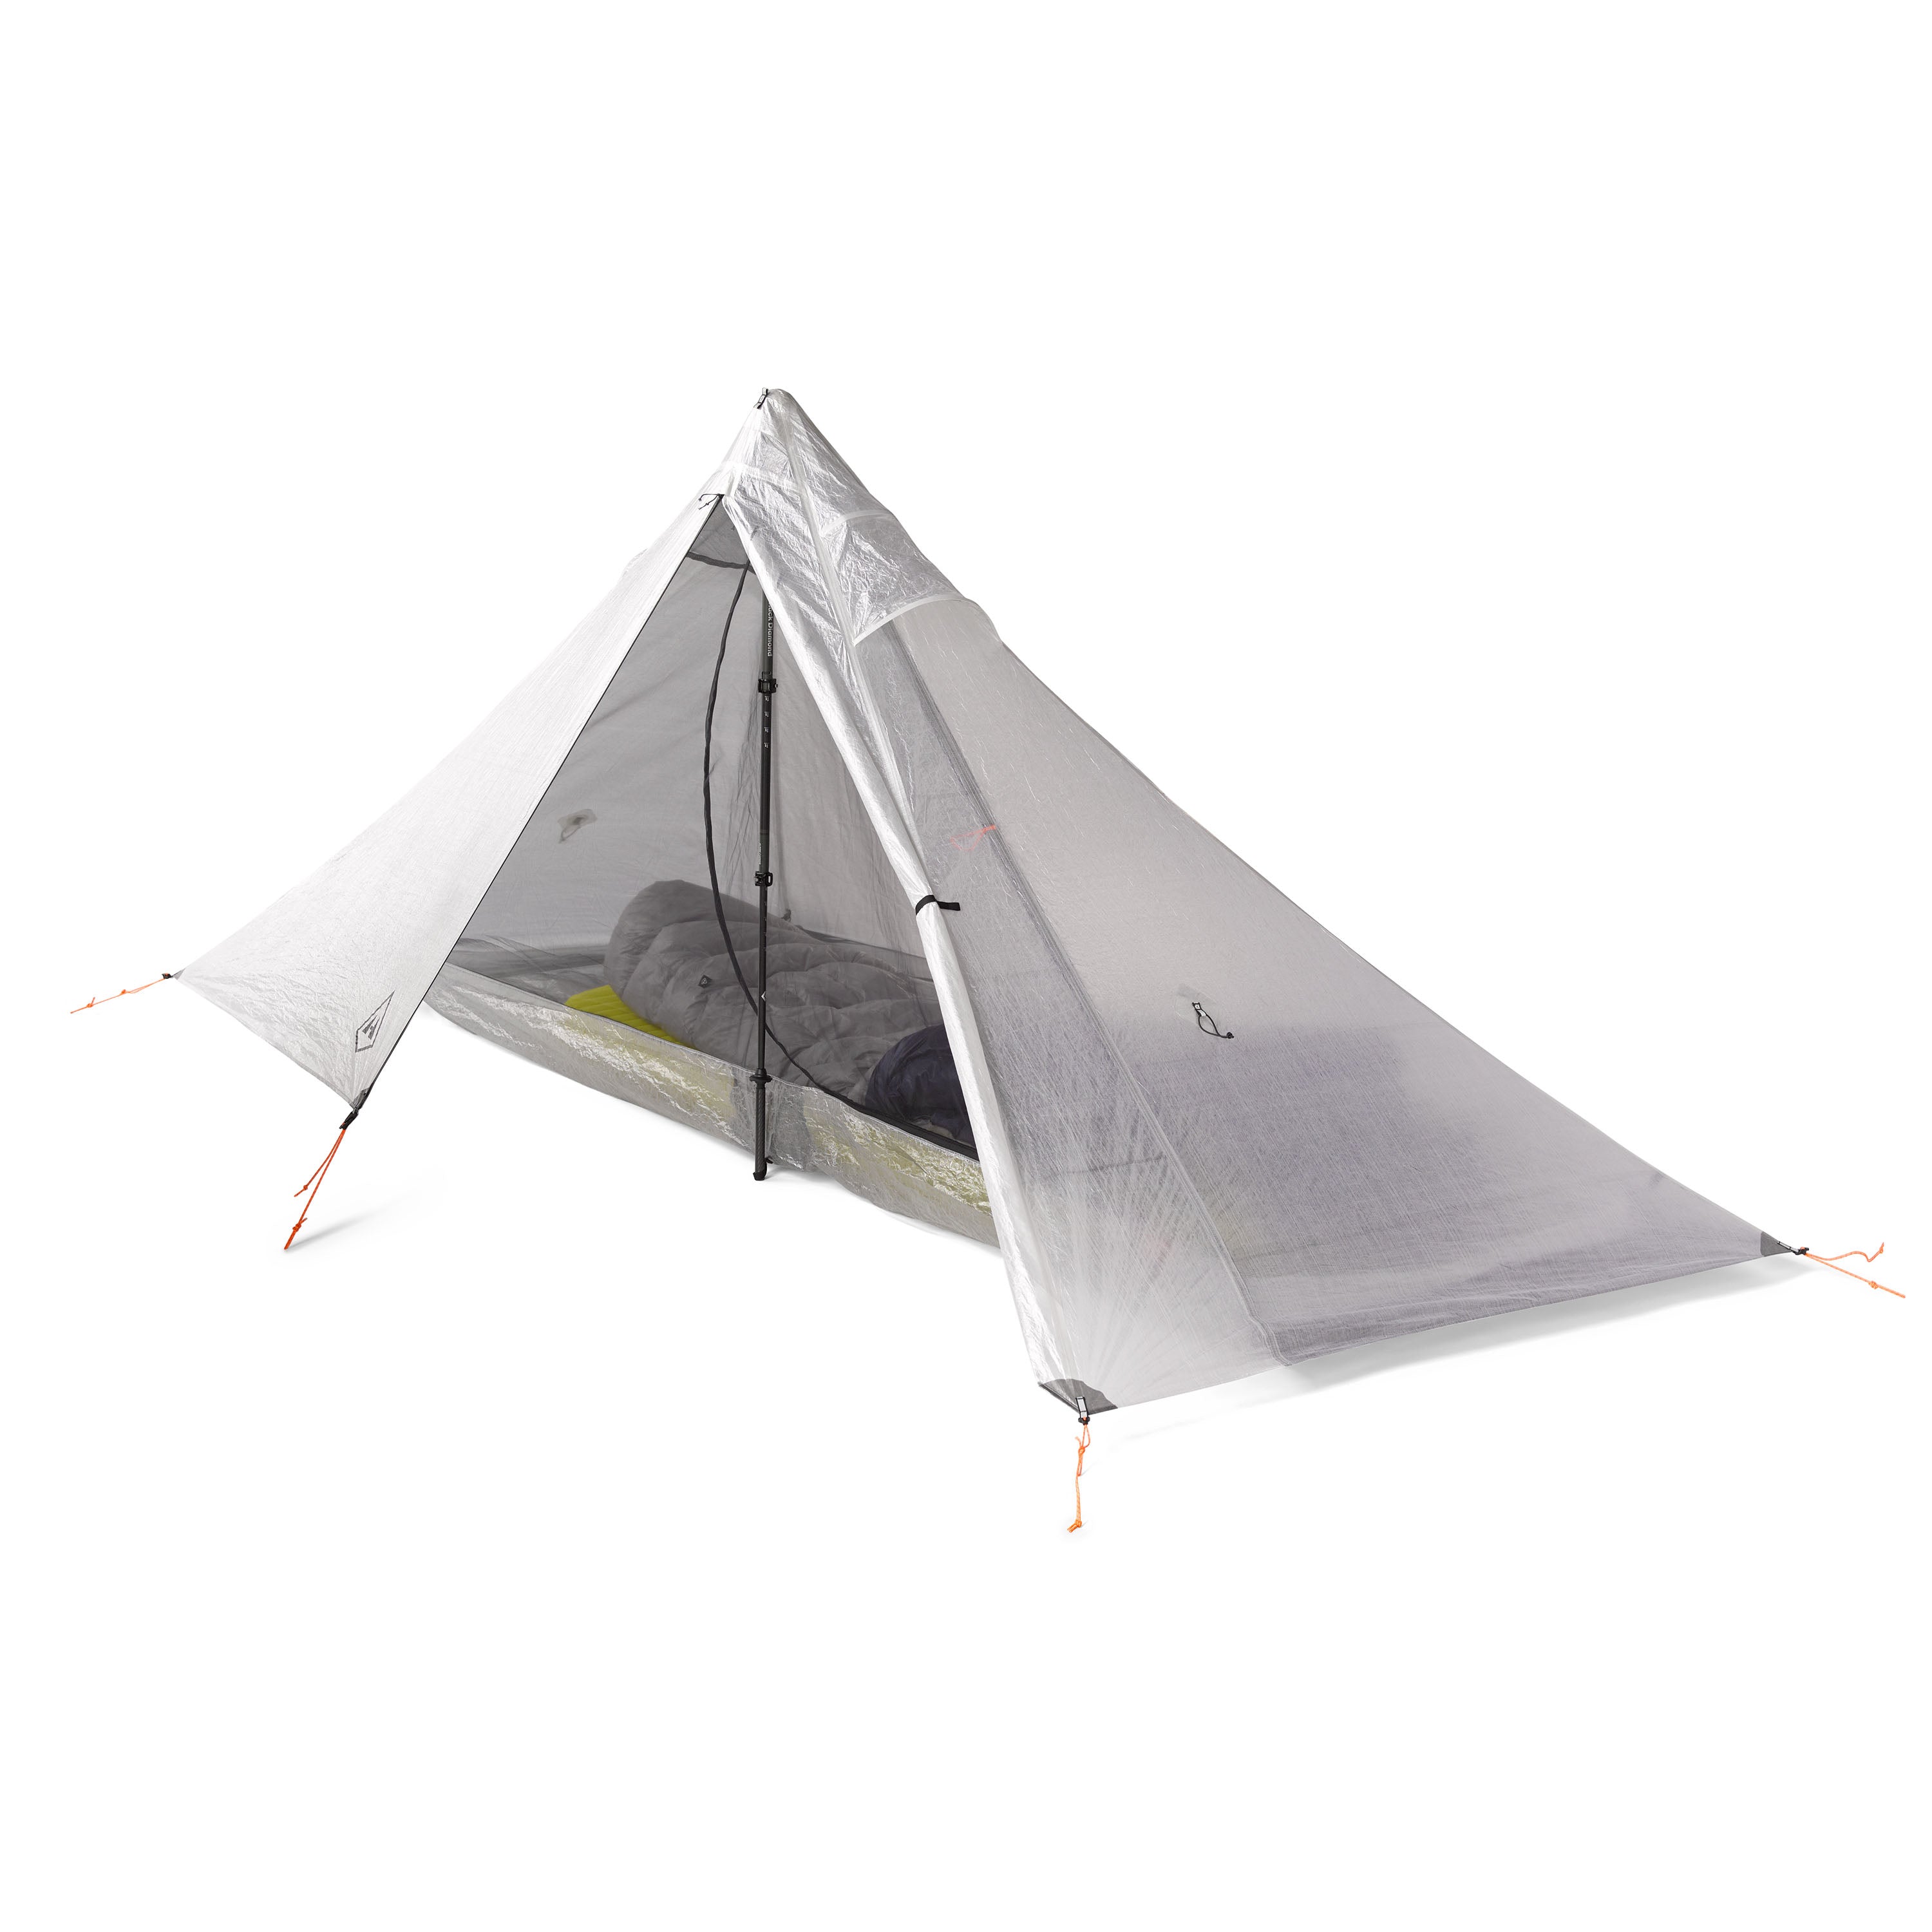 Tents & Shelters